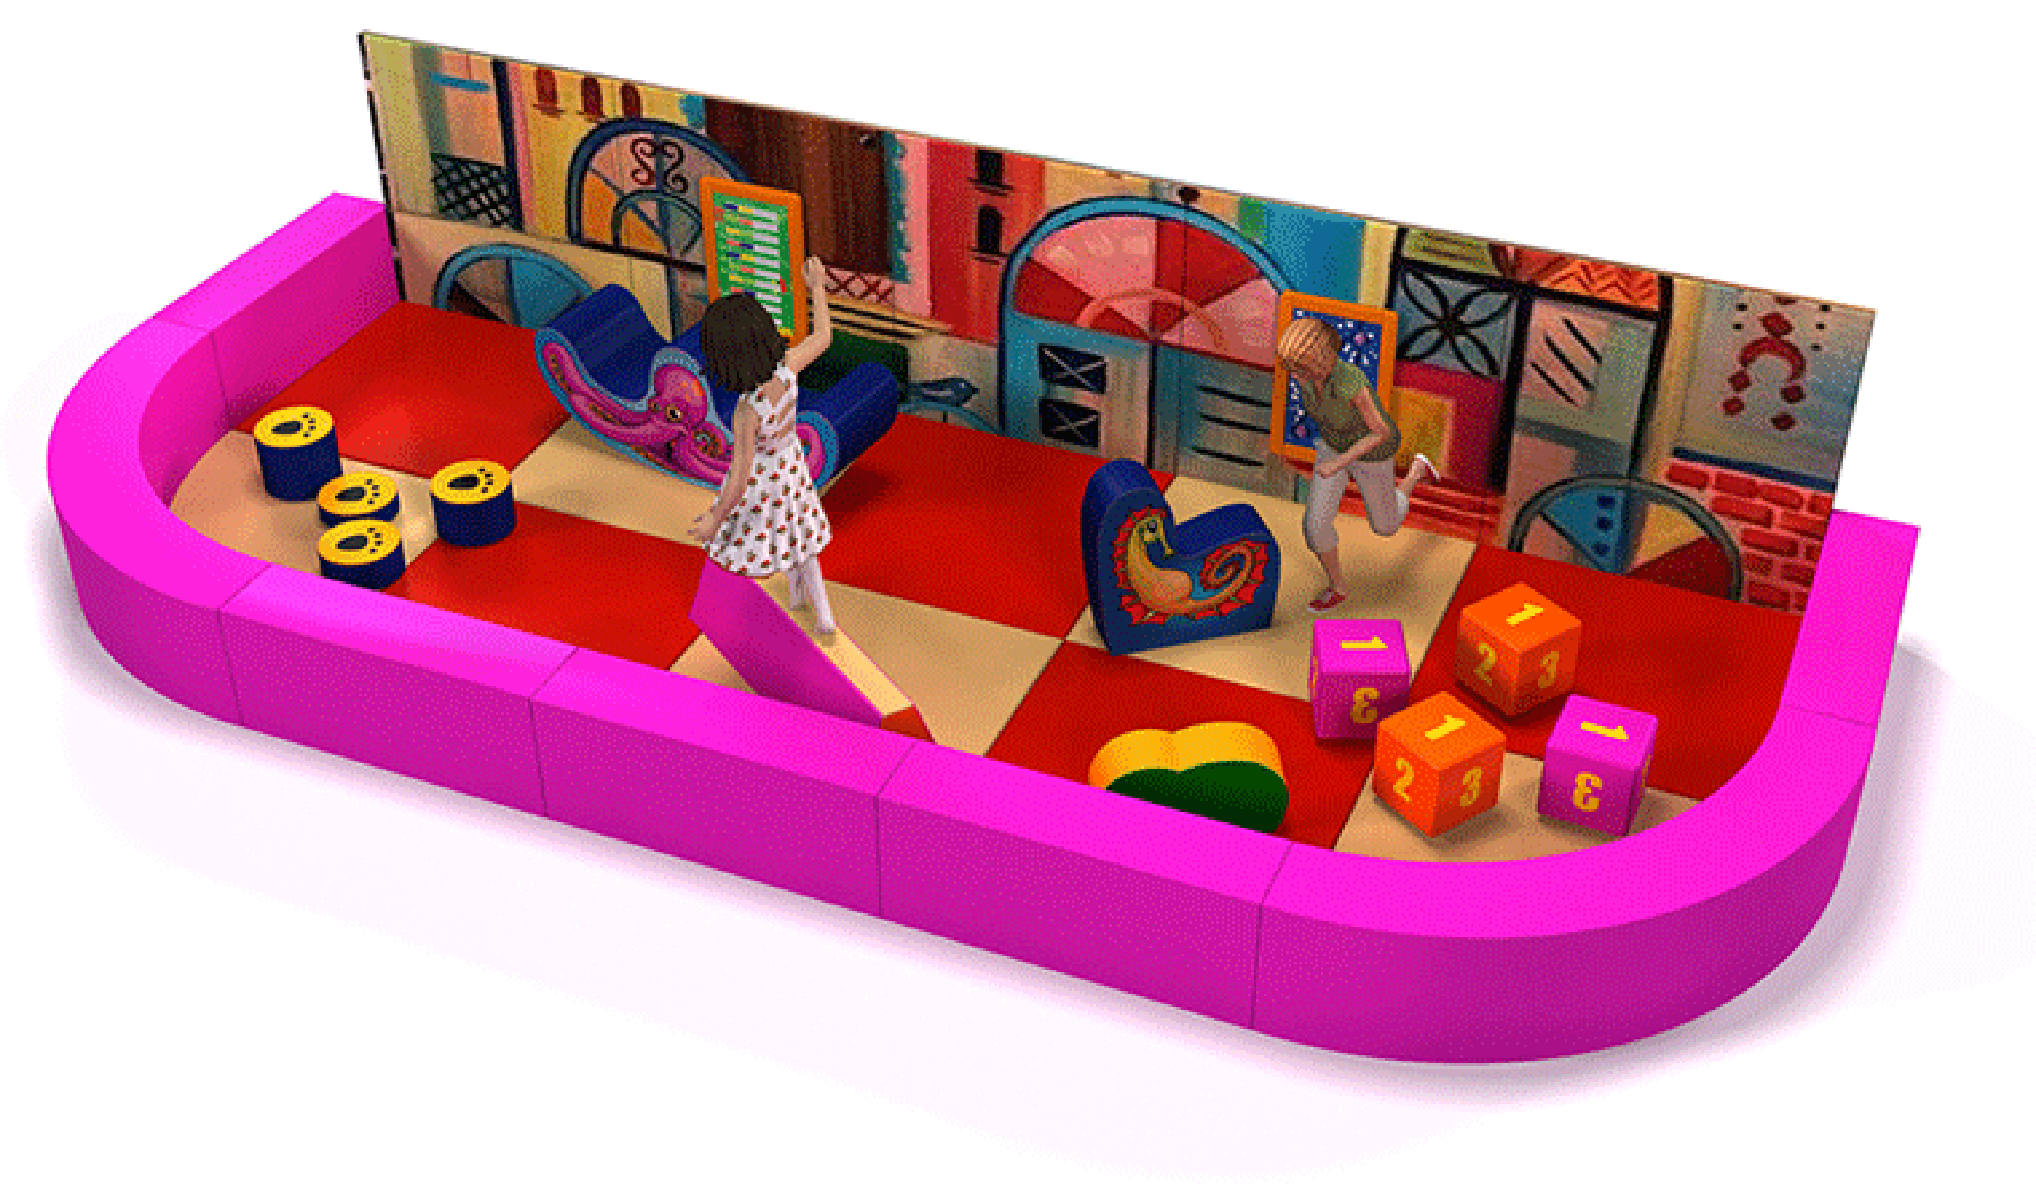 Soft play for toddlers in indoor playgrounds or kidscorners